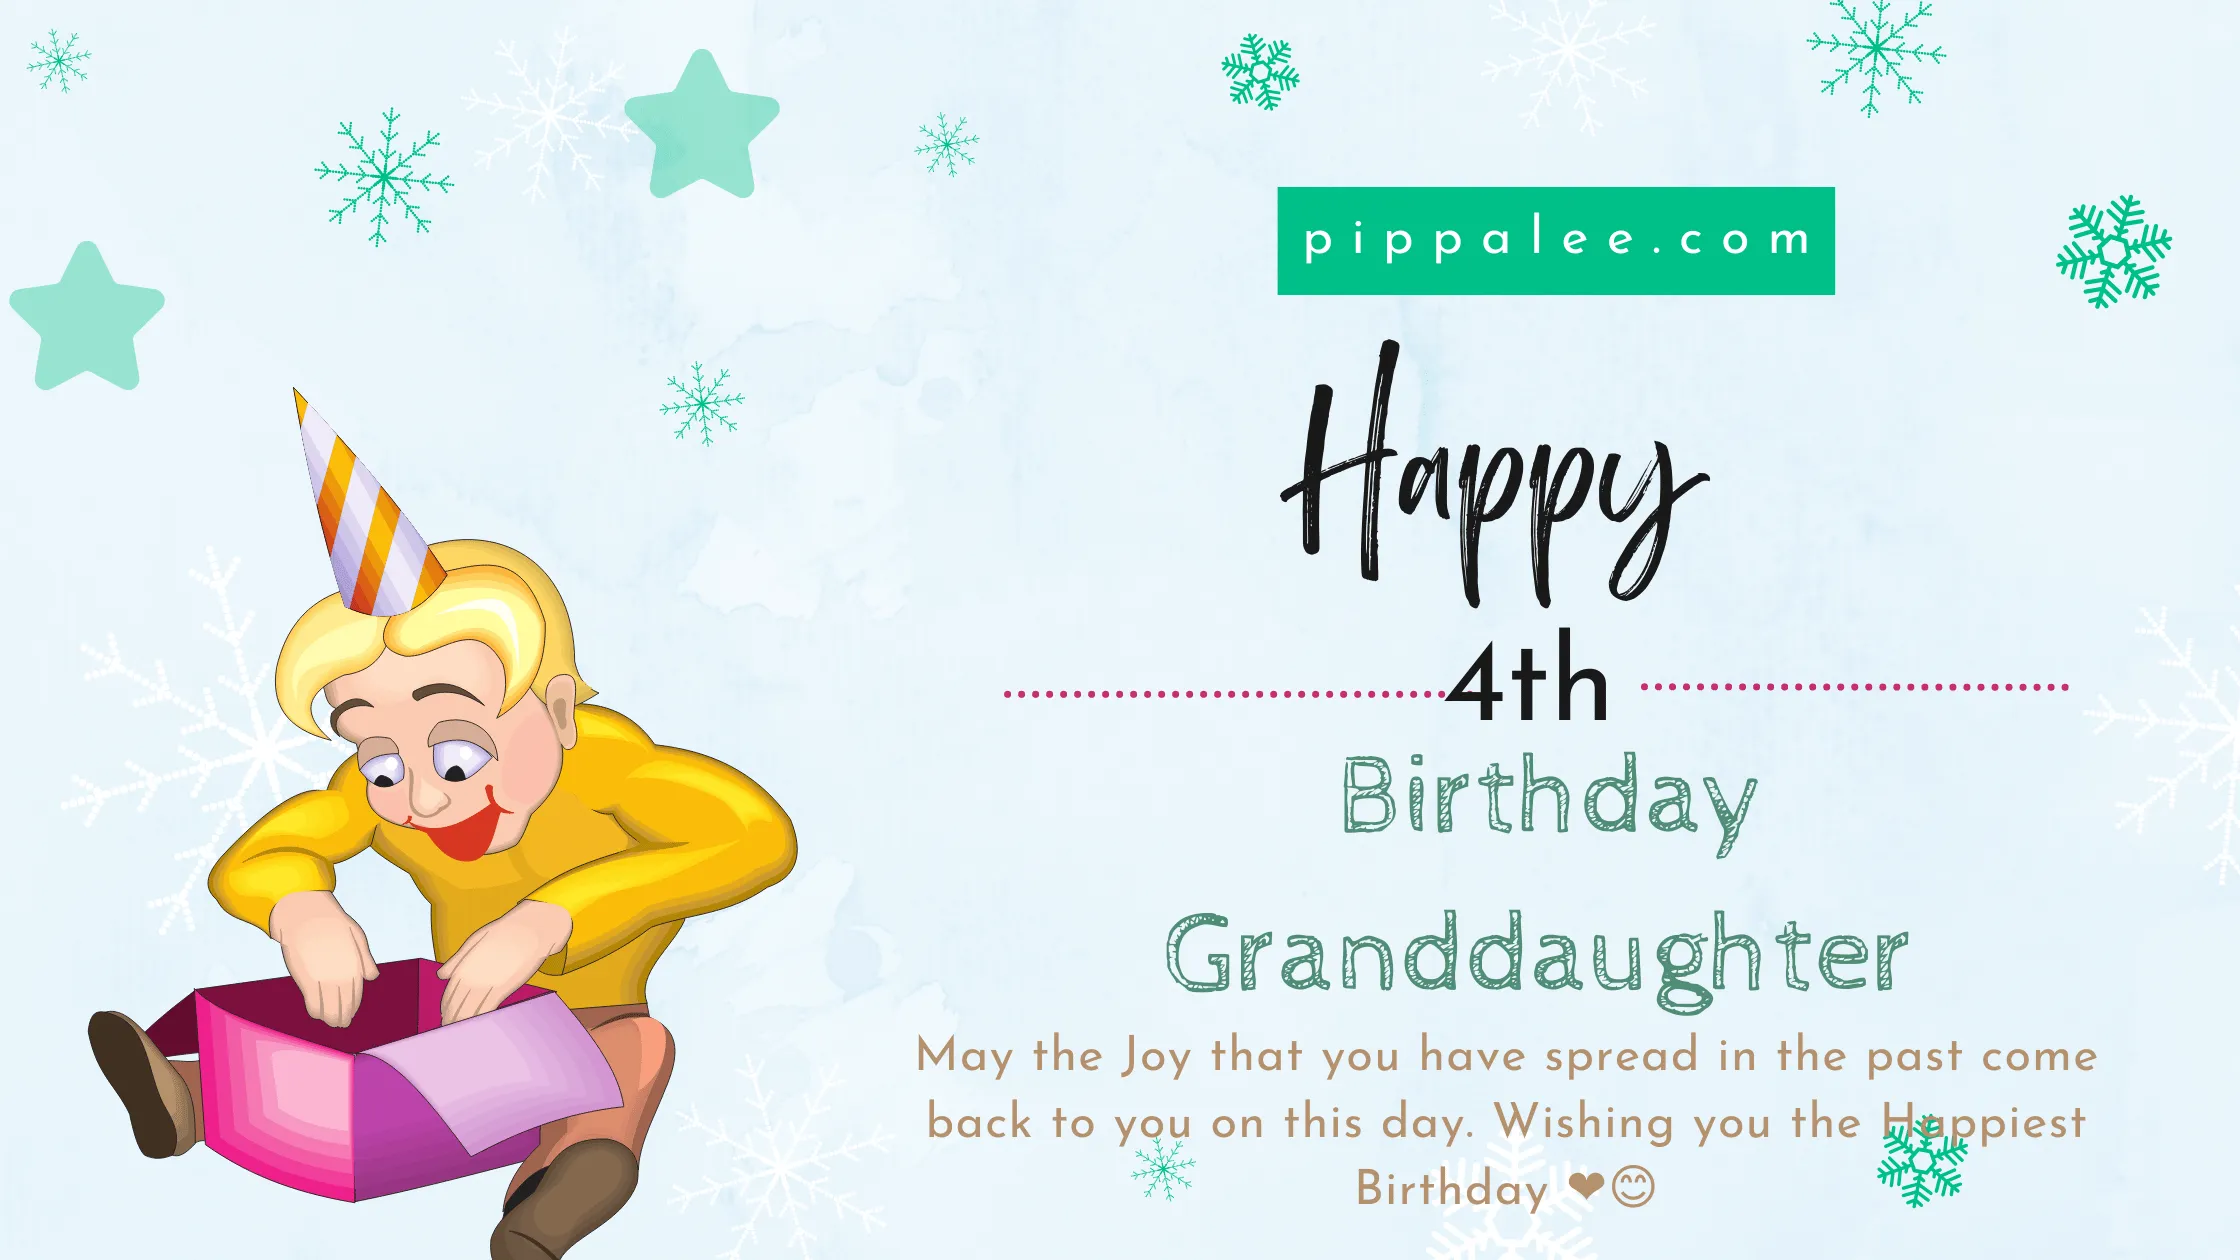 Happy 4th Birthday Granddaughter - Wishes & Messages